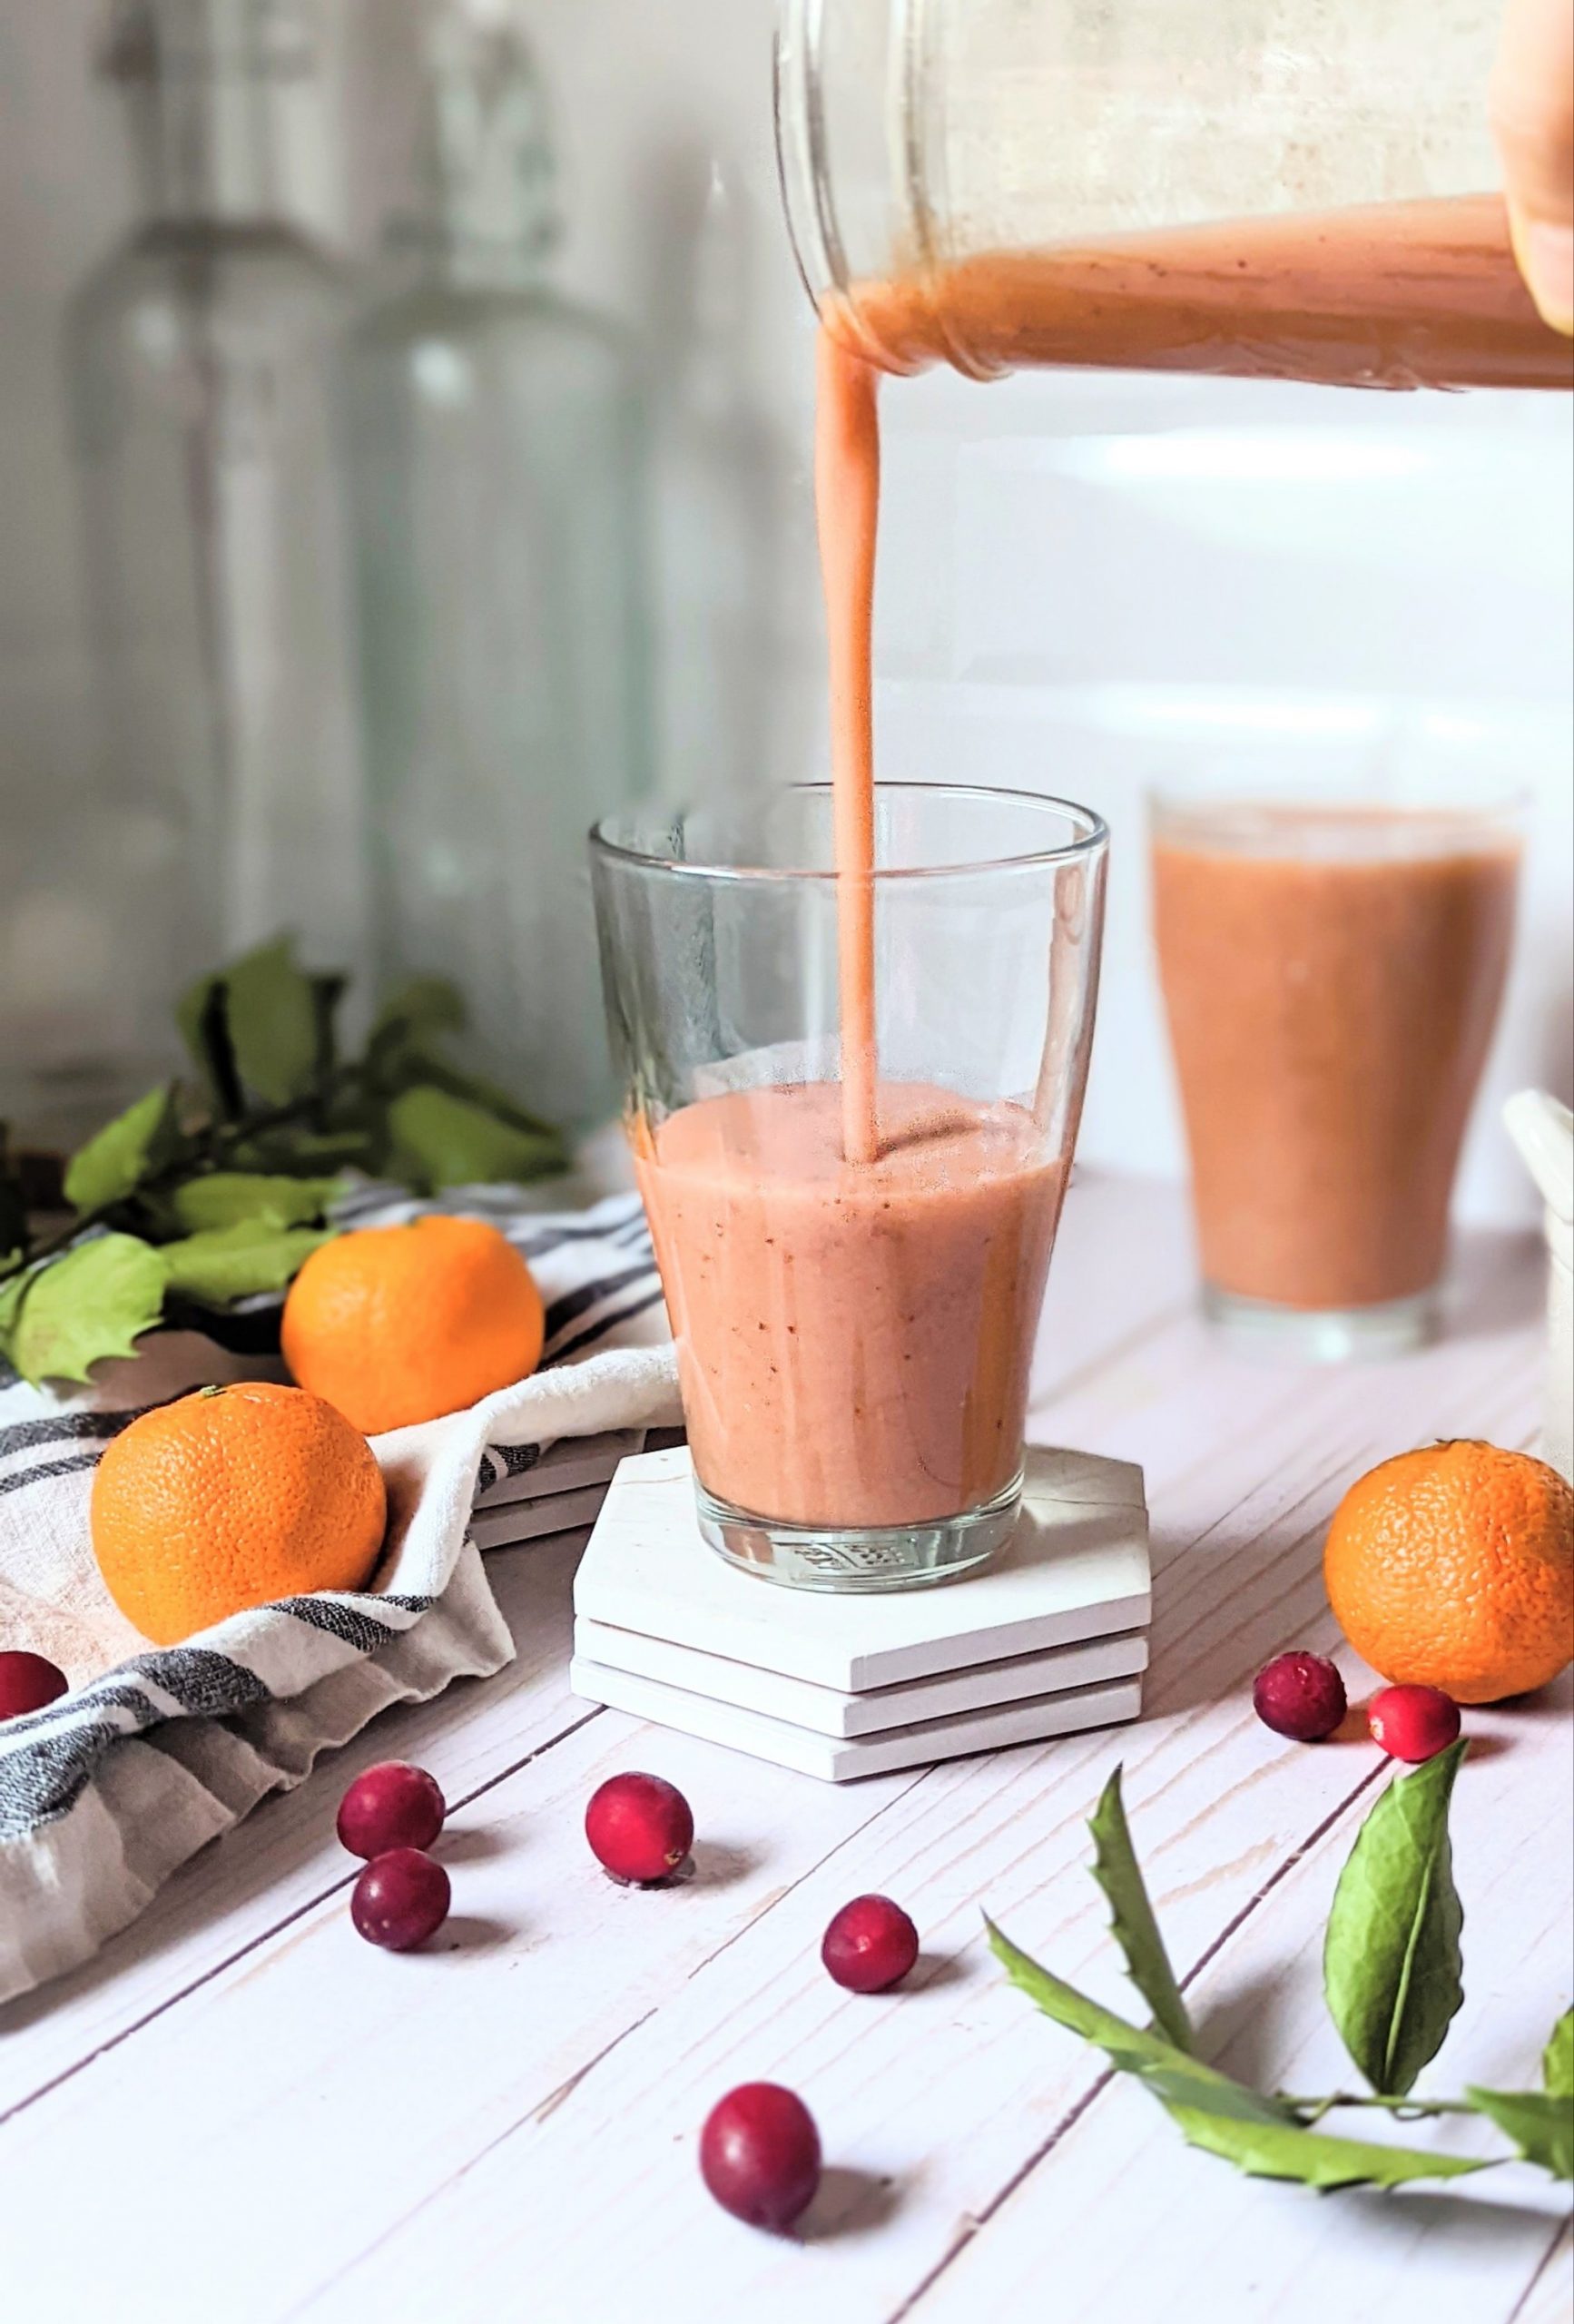 cranberry orange juice smoothie recipe healthy recipes with cranberries for breakfast cranberries in smoothies cranberry shake with vegan vanilla protein powder dairy free